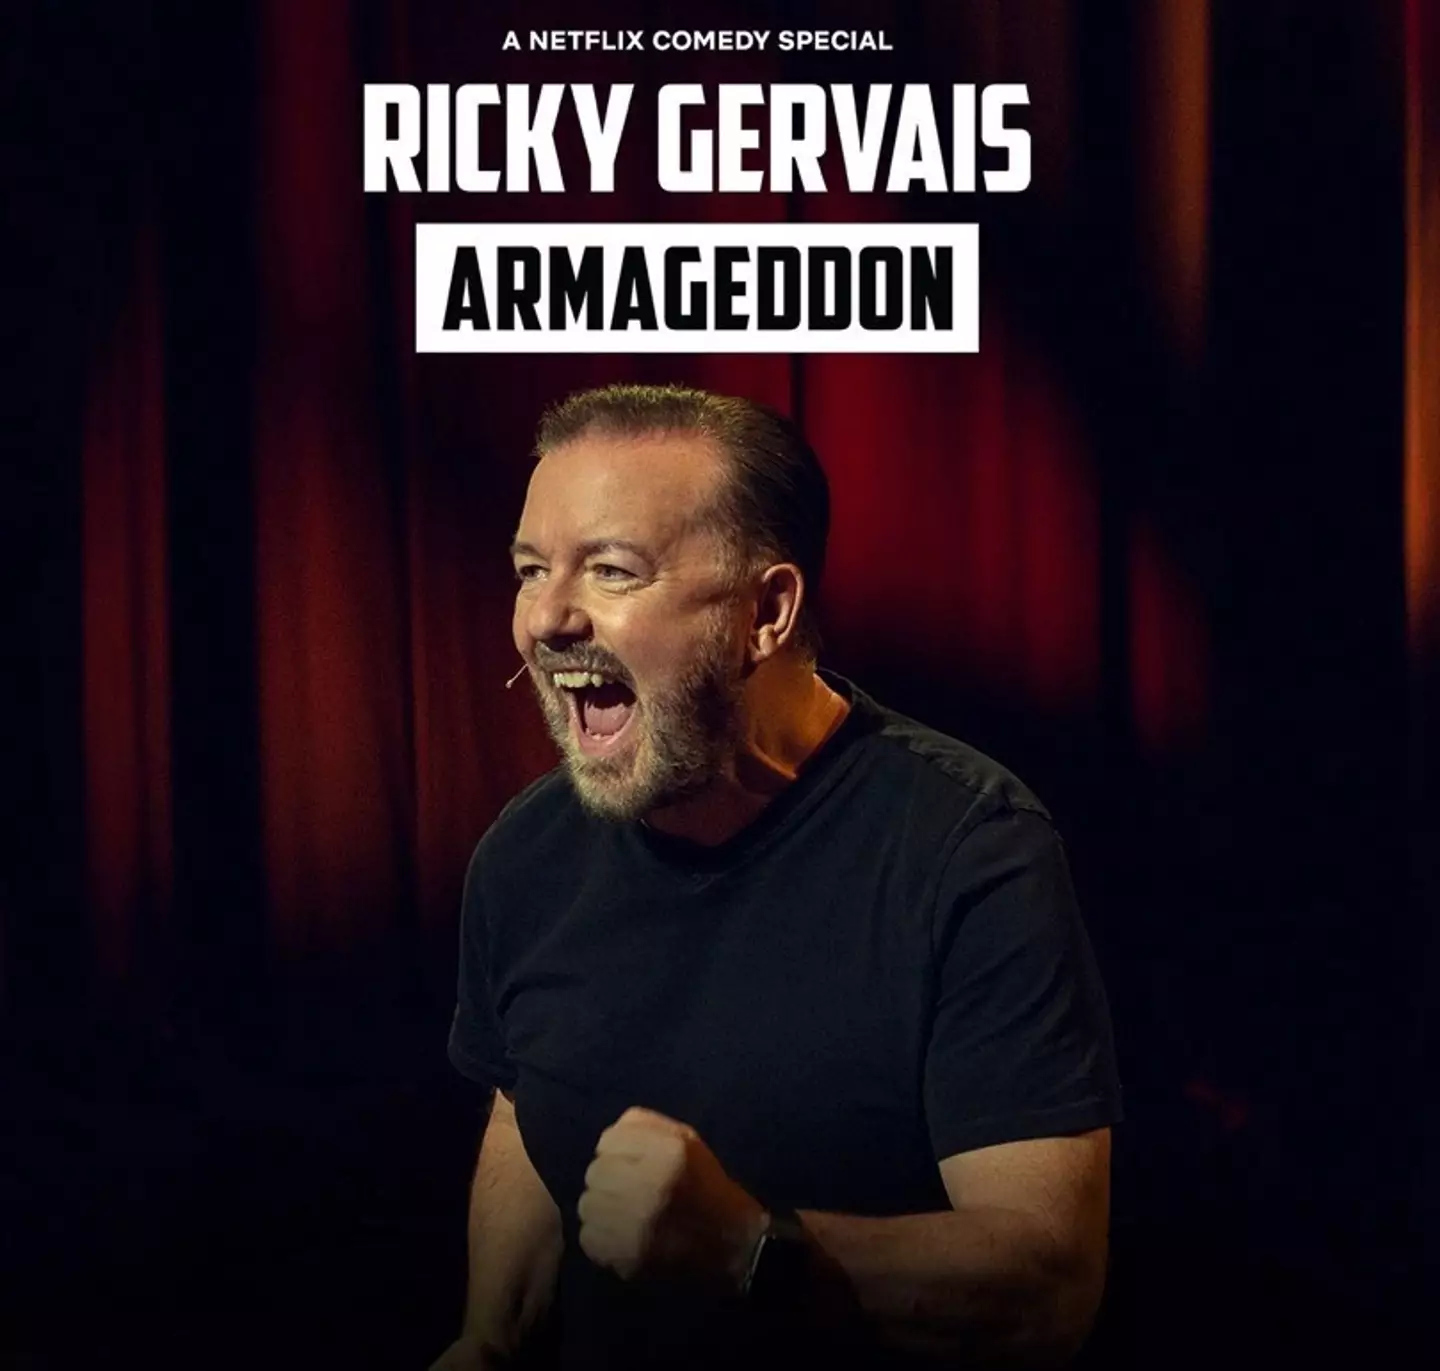 The comedian took to social media on Wednesday (29 November) to promote his upcoming Netflix special Armageddon.